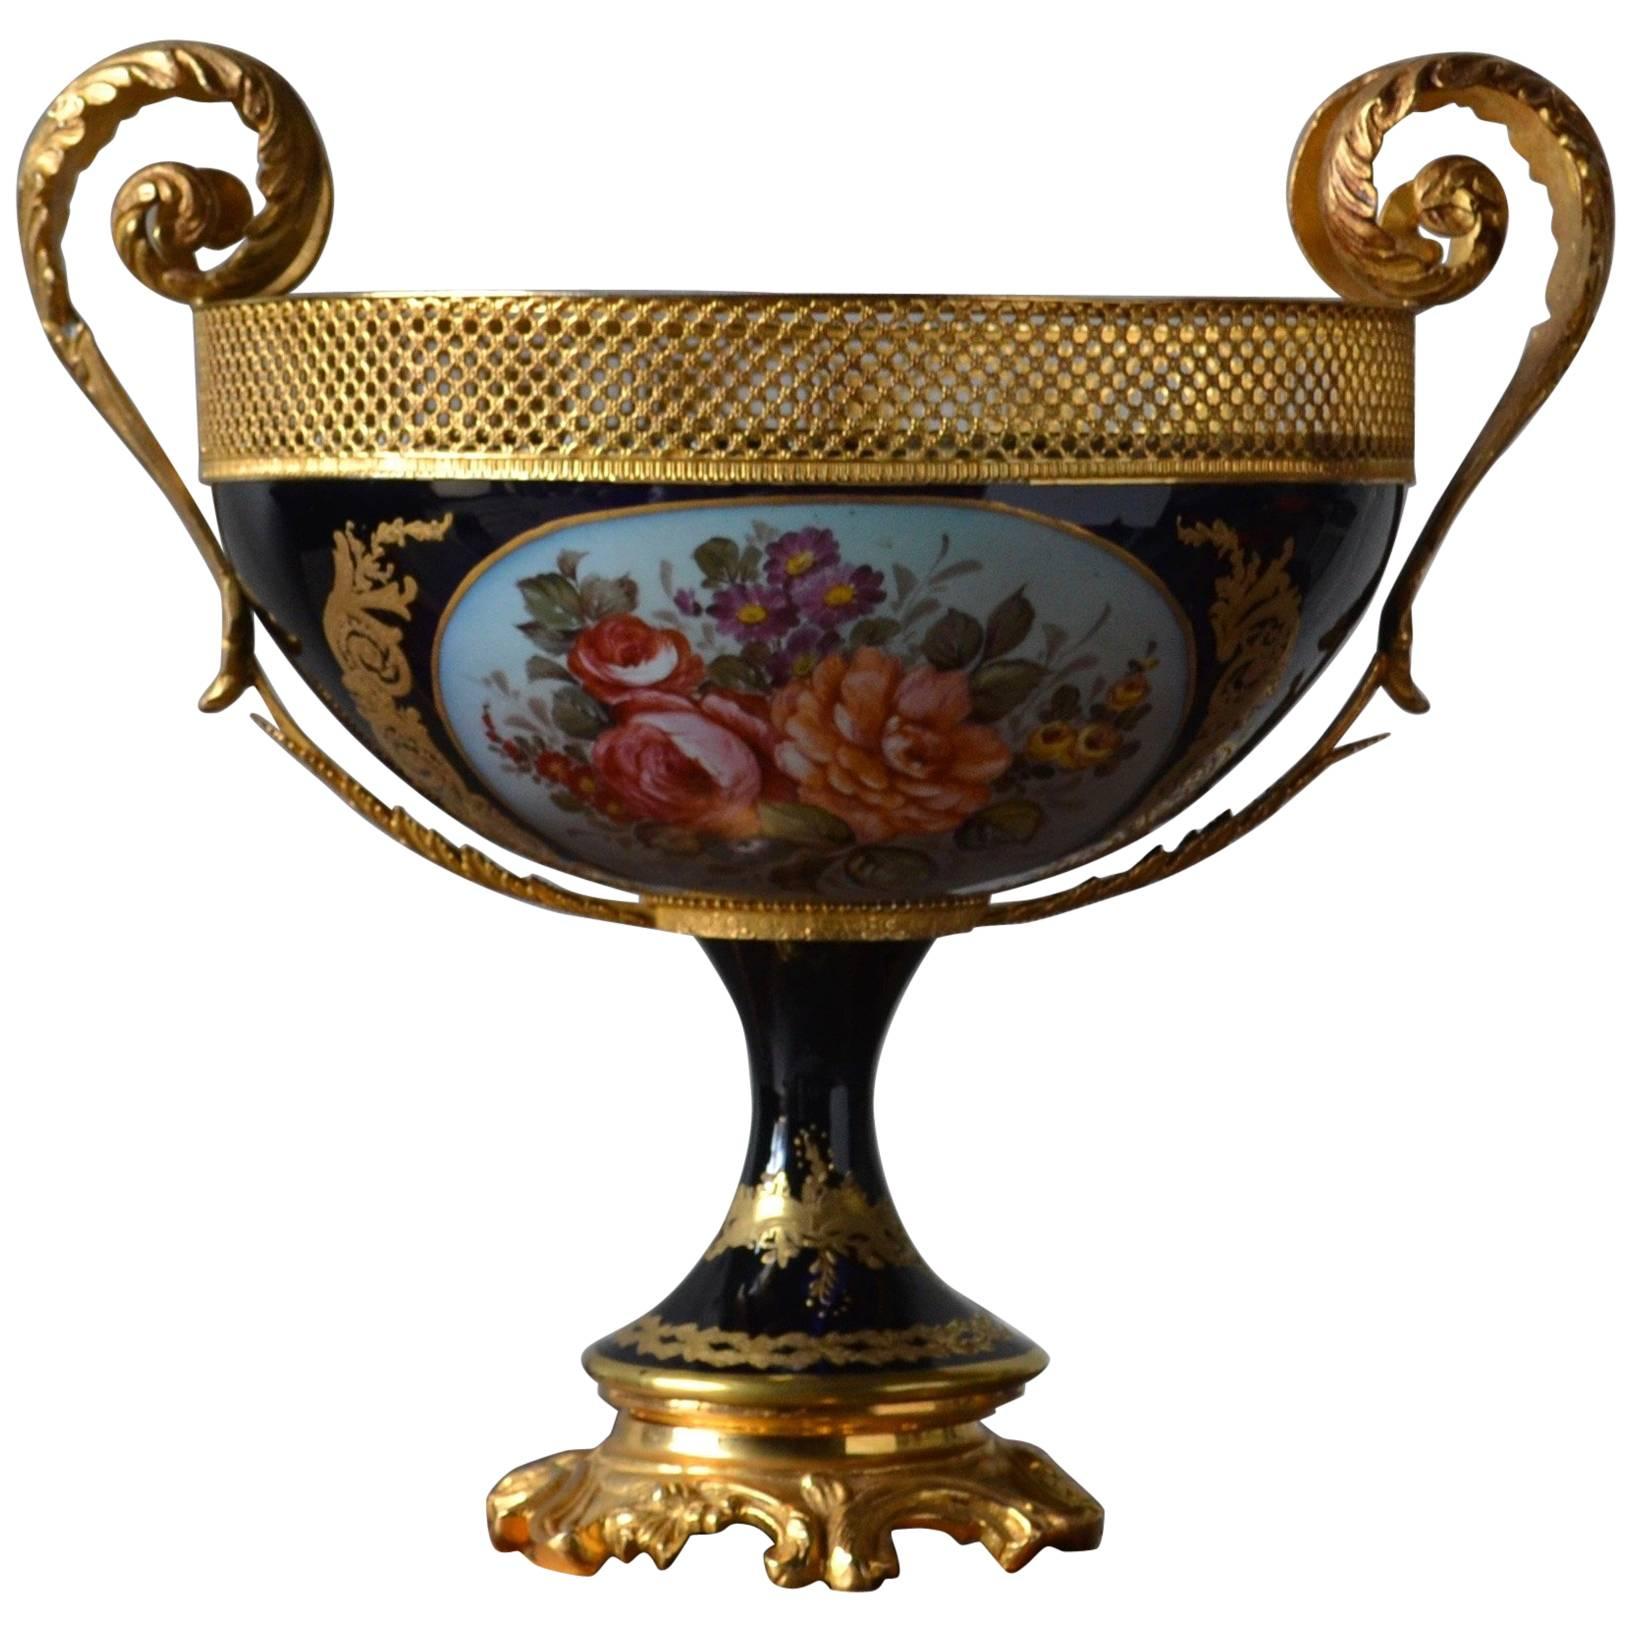 19th Century Sèvres French Hand-Painted Porcelain Jardiniére with Bronze Mounts For Sale